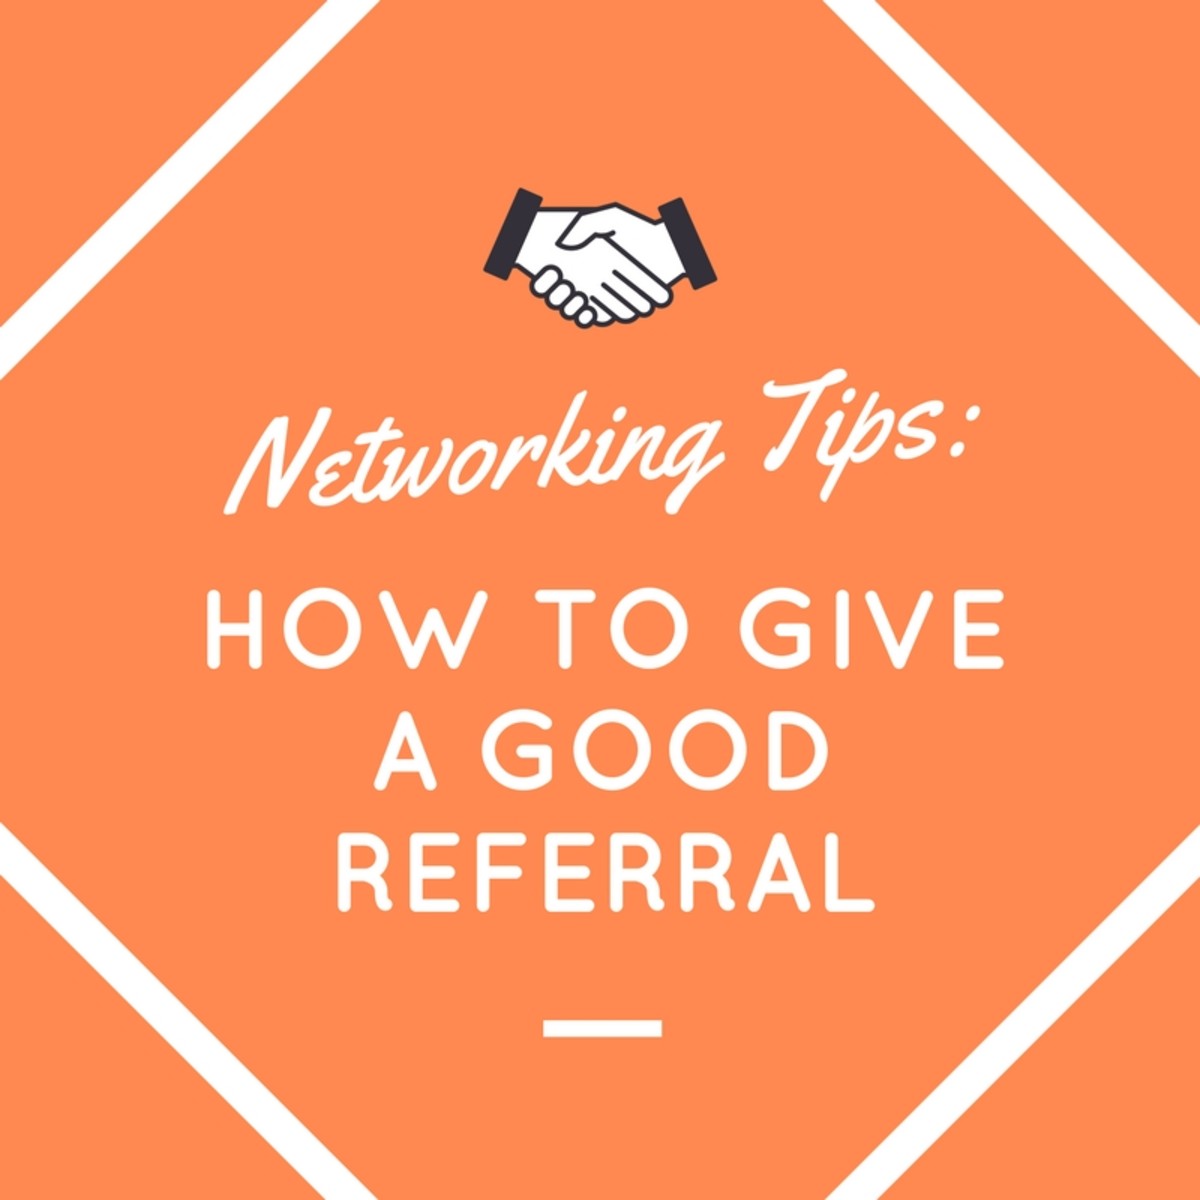 networking-tips-how-to-give-a-good-referral